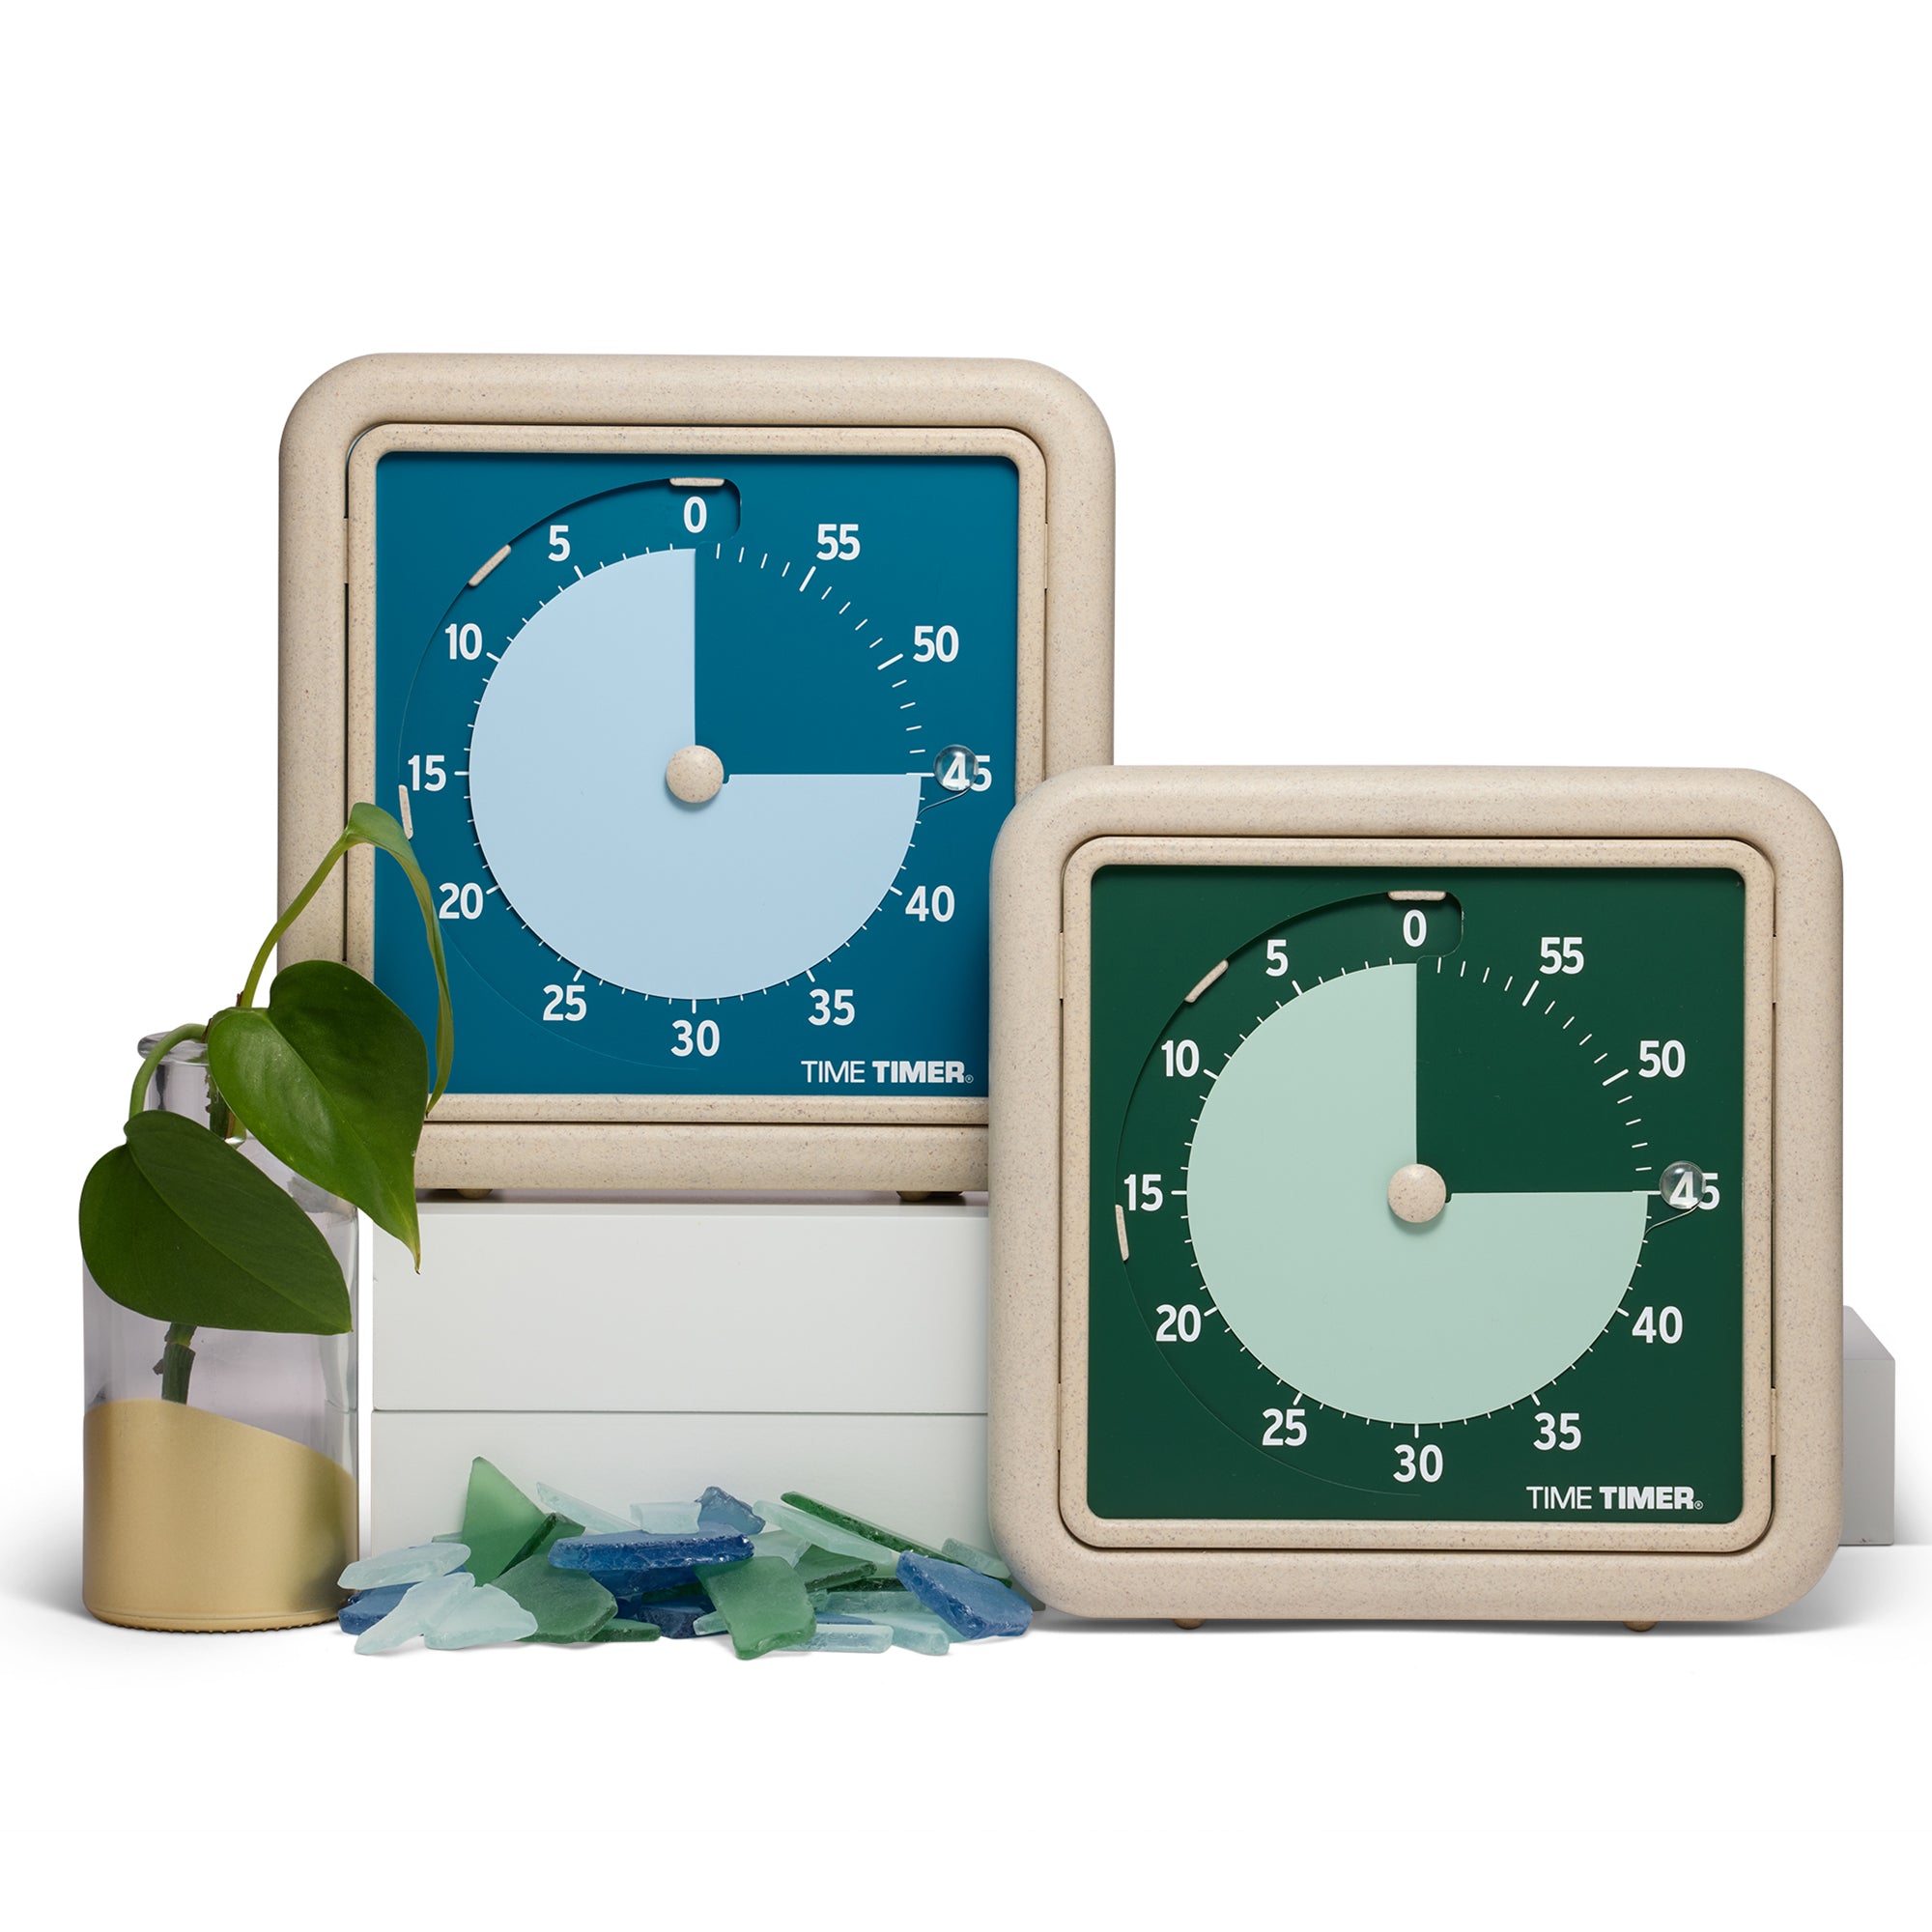 Two 60-minute visual timers are sitting next to each other. One is a dark blue color with light blue disk. The other is a dark green color with light green disk. Both have a textured beige frame. They are placed next to a green plant in a glass and gold vase and pieces of sea glass are scattered in front. 